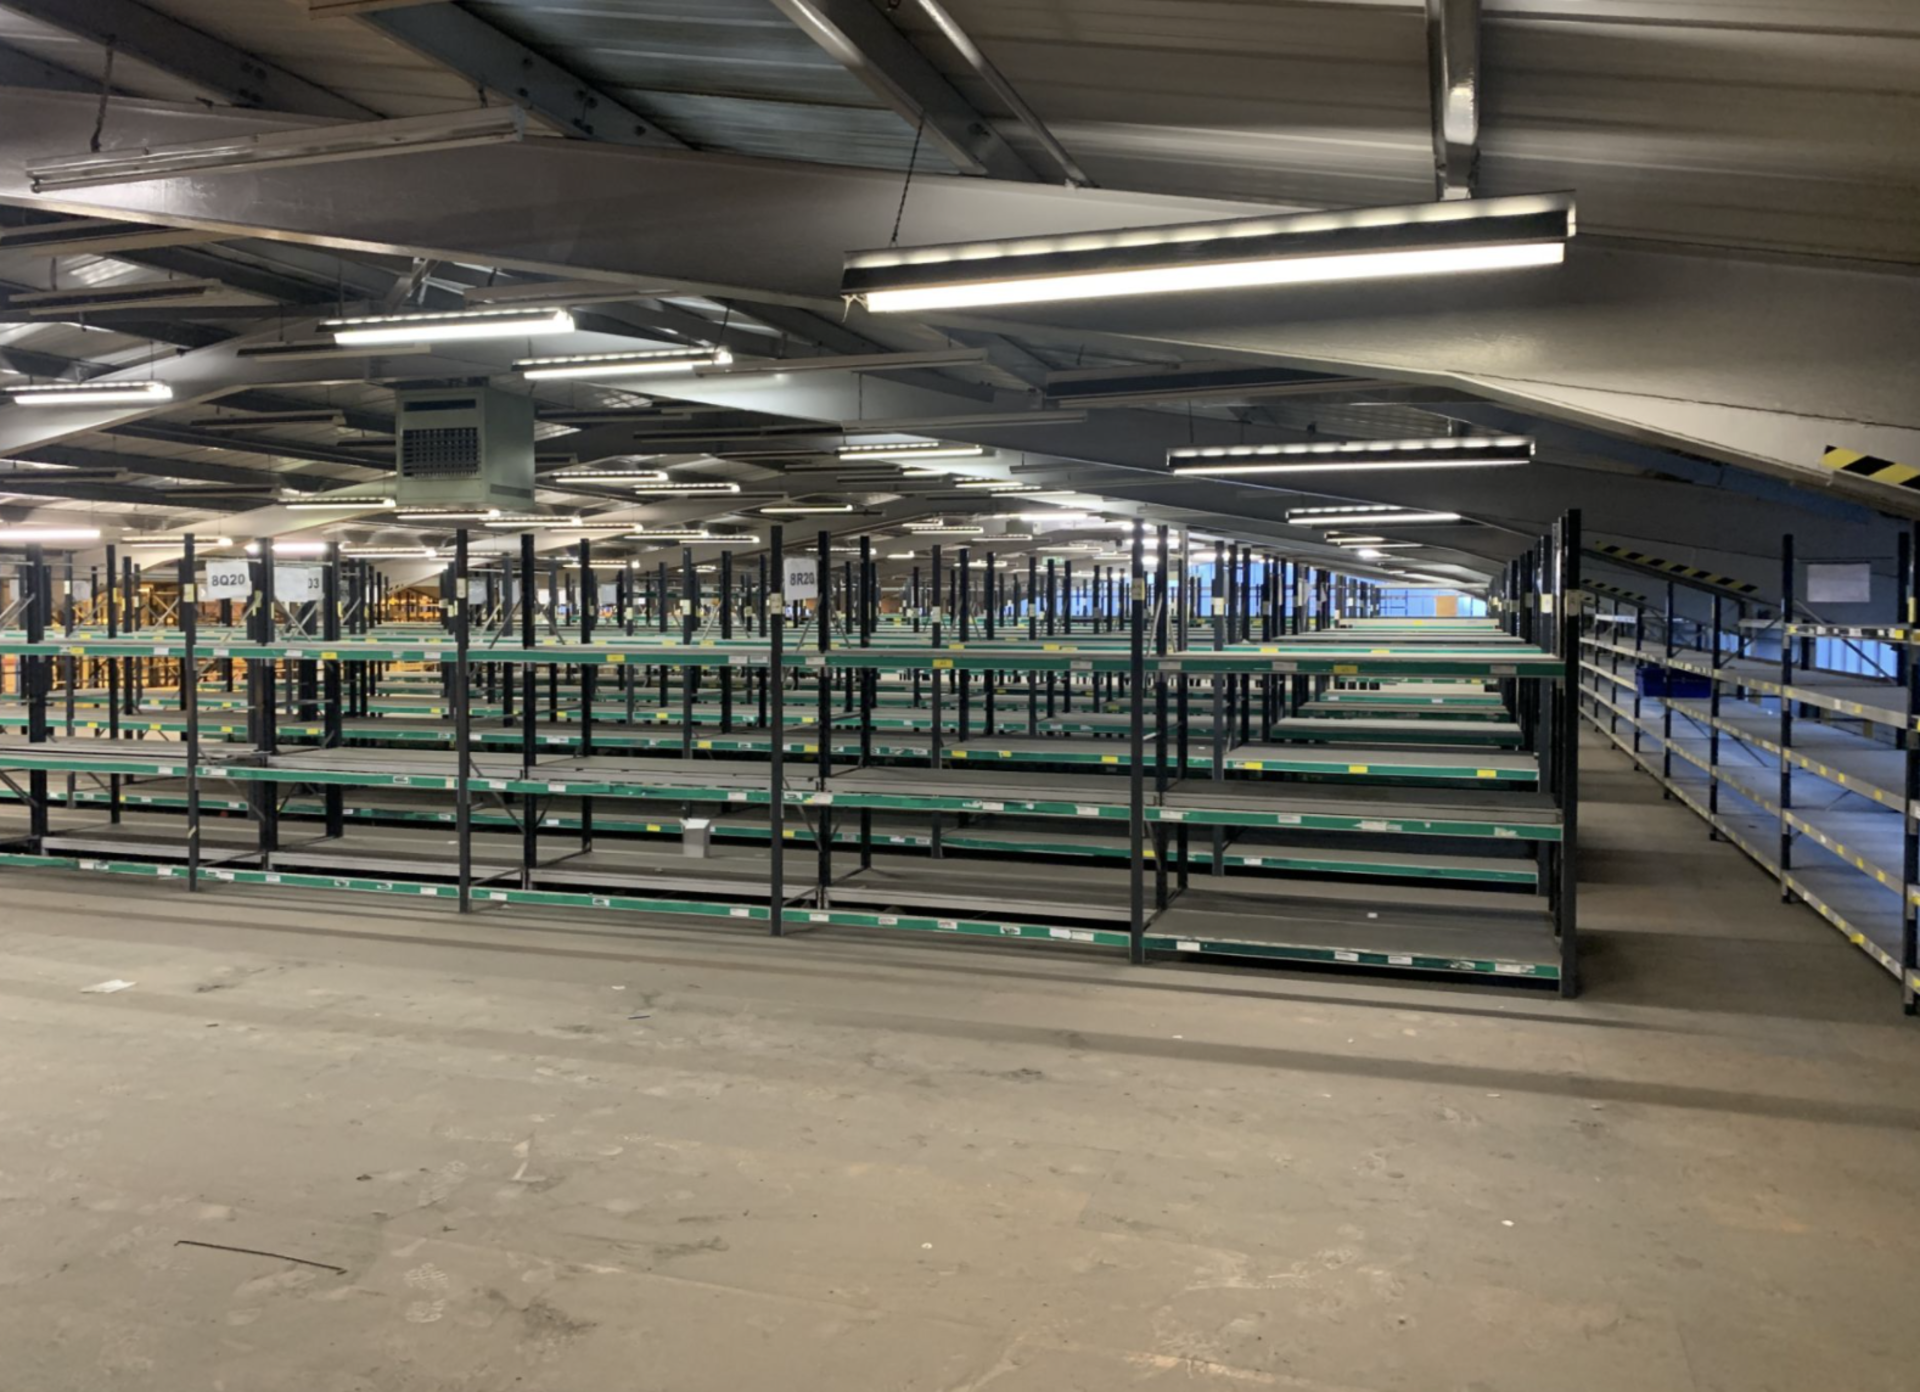 £500,000 MEZZANINE FLOOR 80m x 28m 3 stairs and loading bay inc - Image 17 of 21